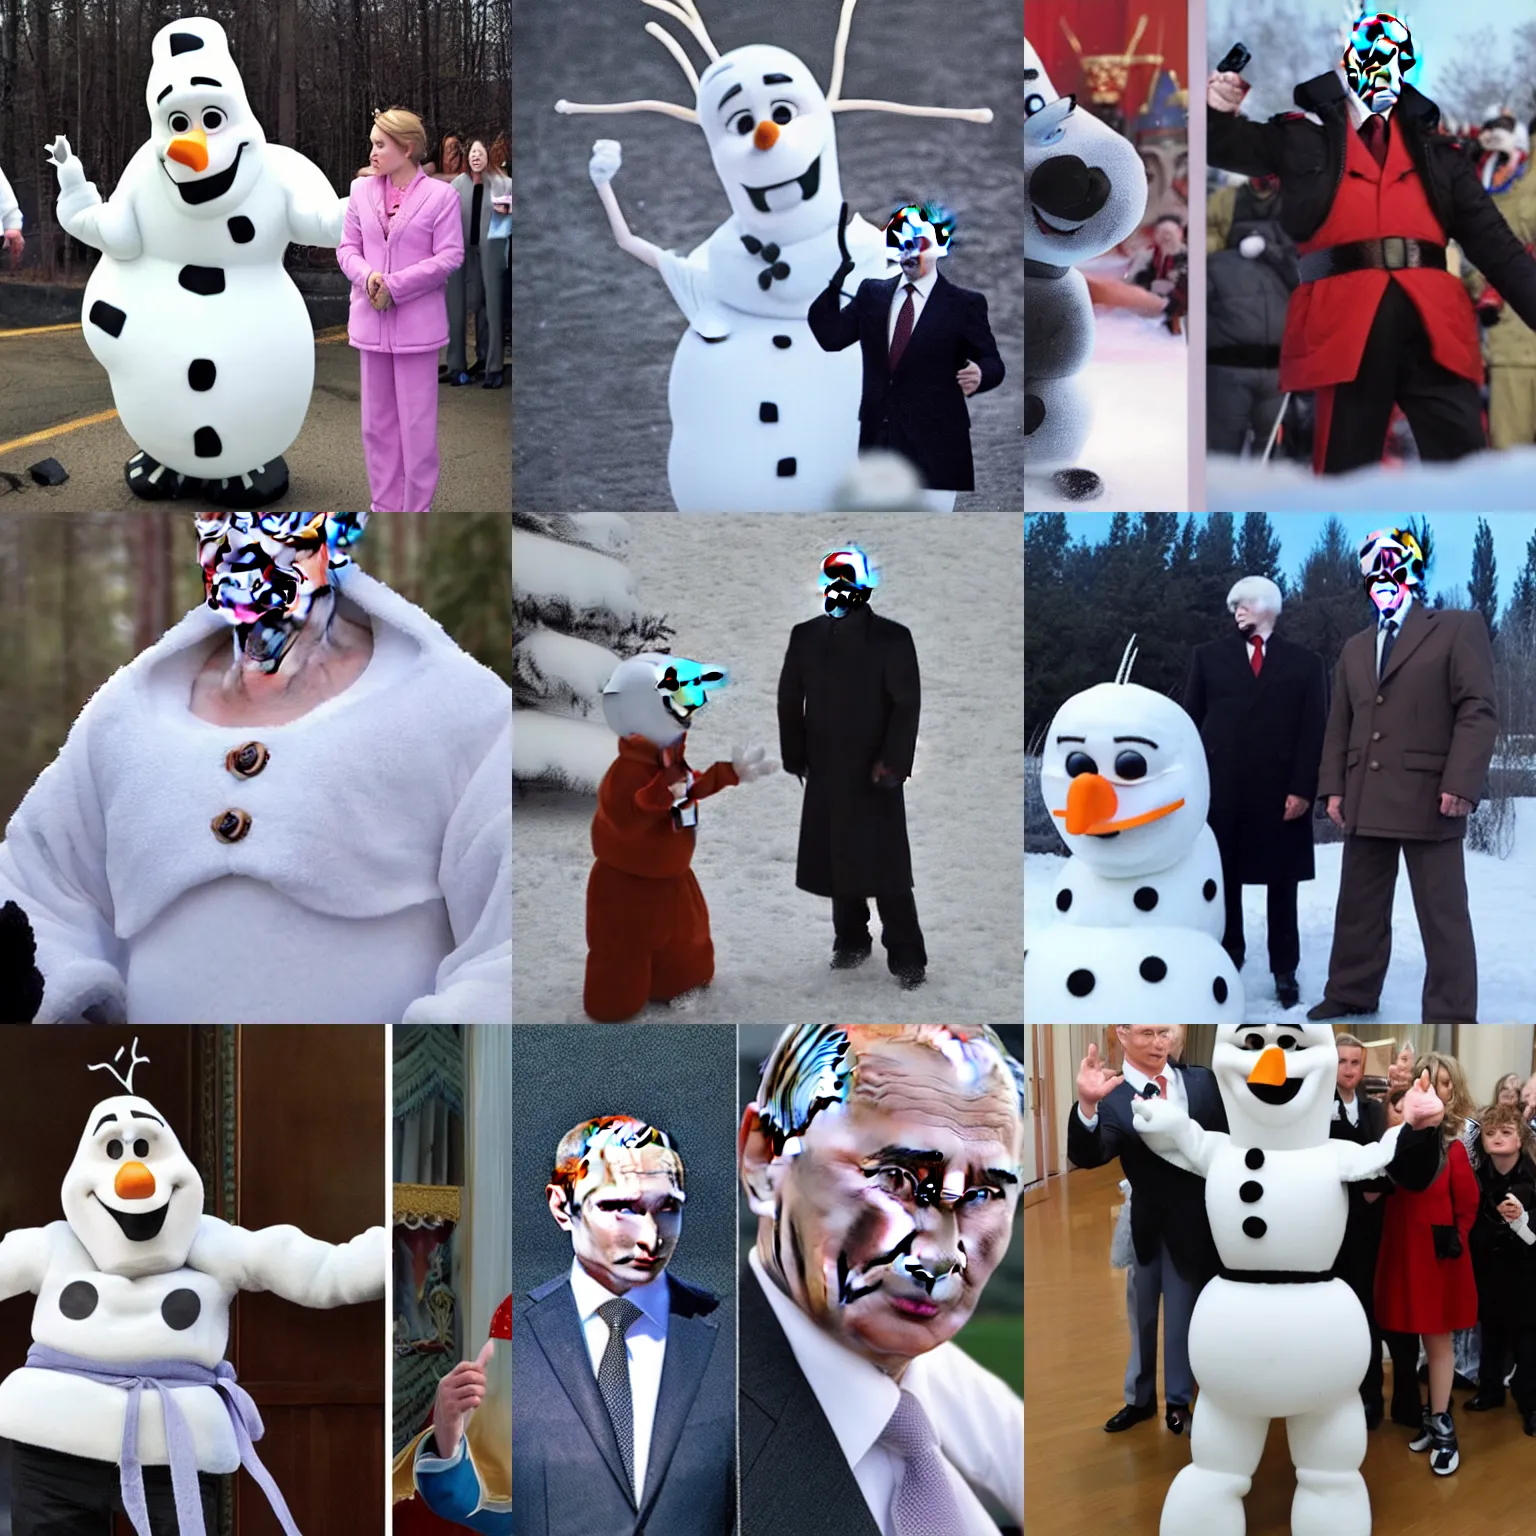 Prompt: Vladimir Putin as Olaf, live action cosplay photograph